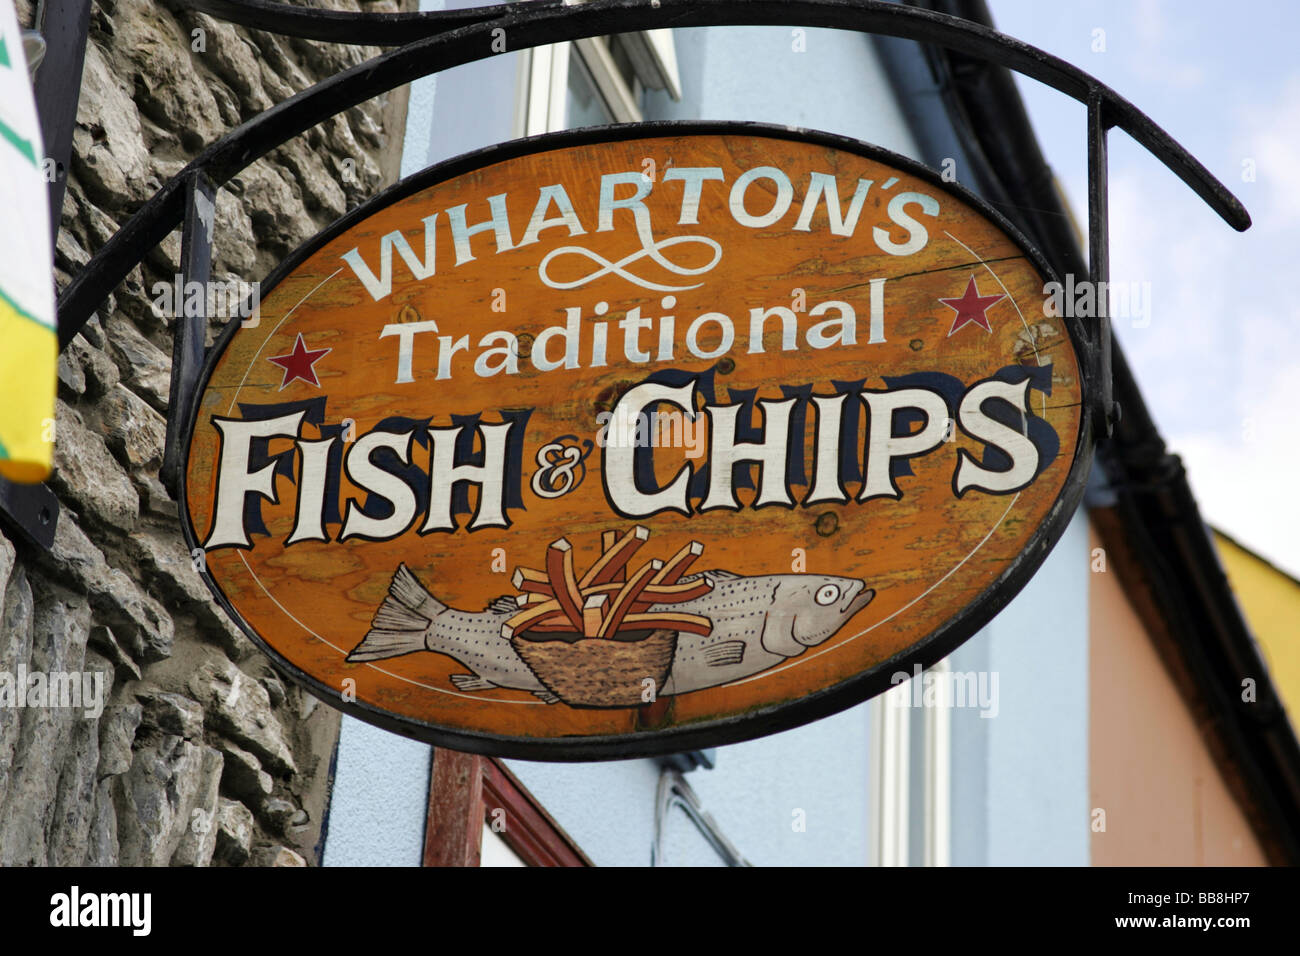 Fish and chips sign, Kenmare, Kerry, Ireland Stock Photo